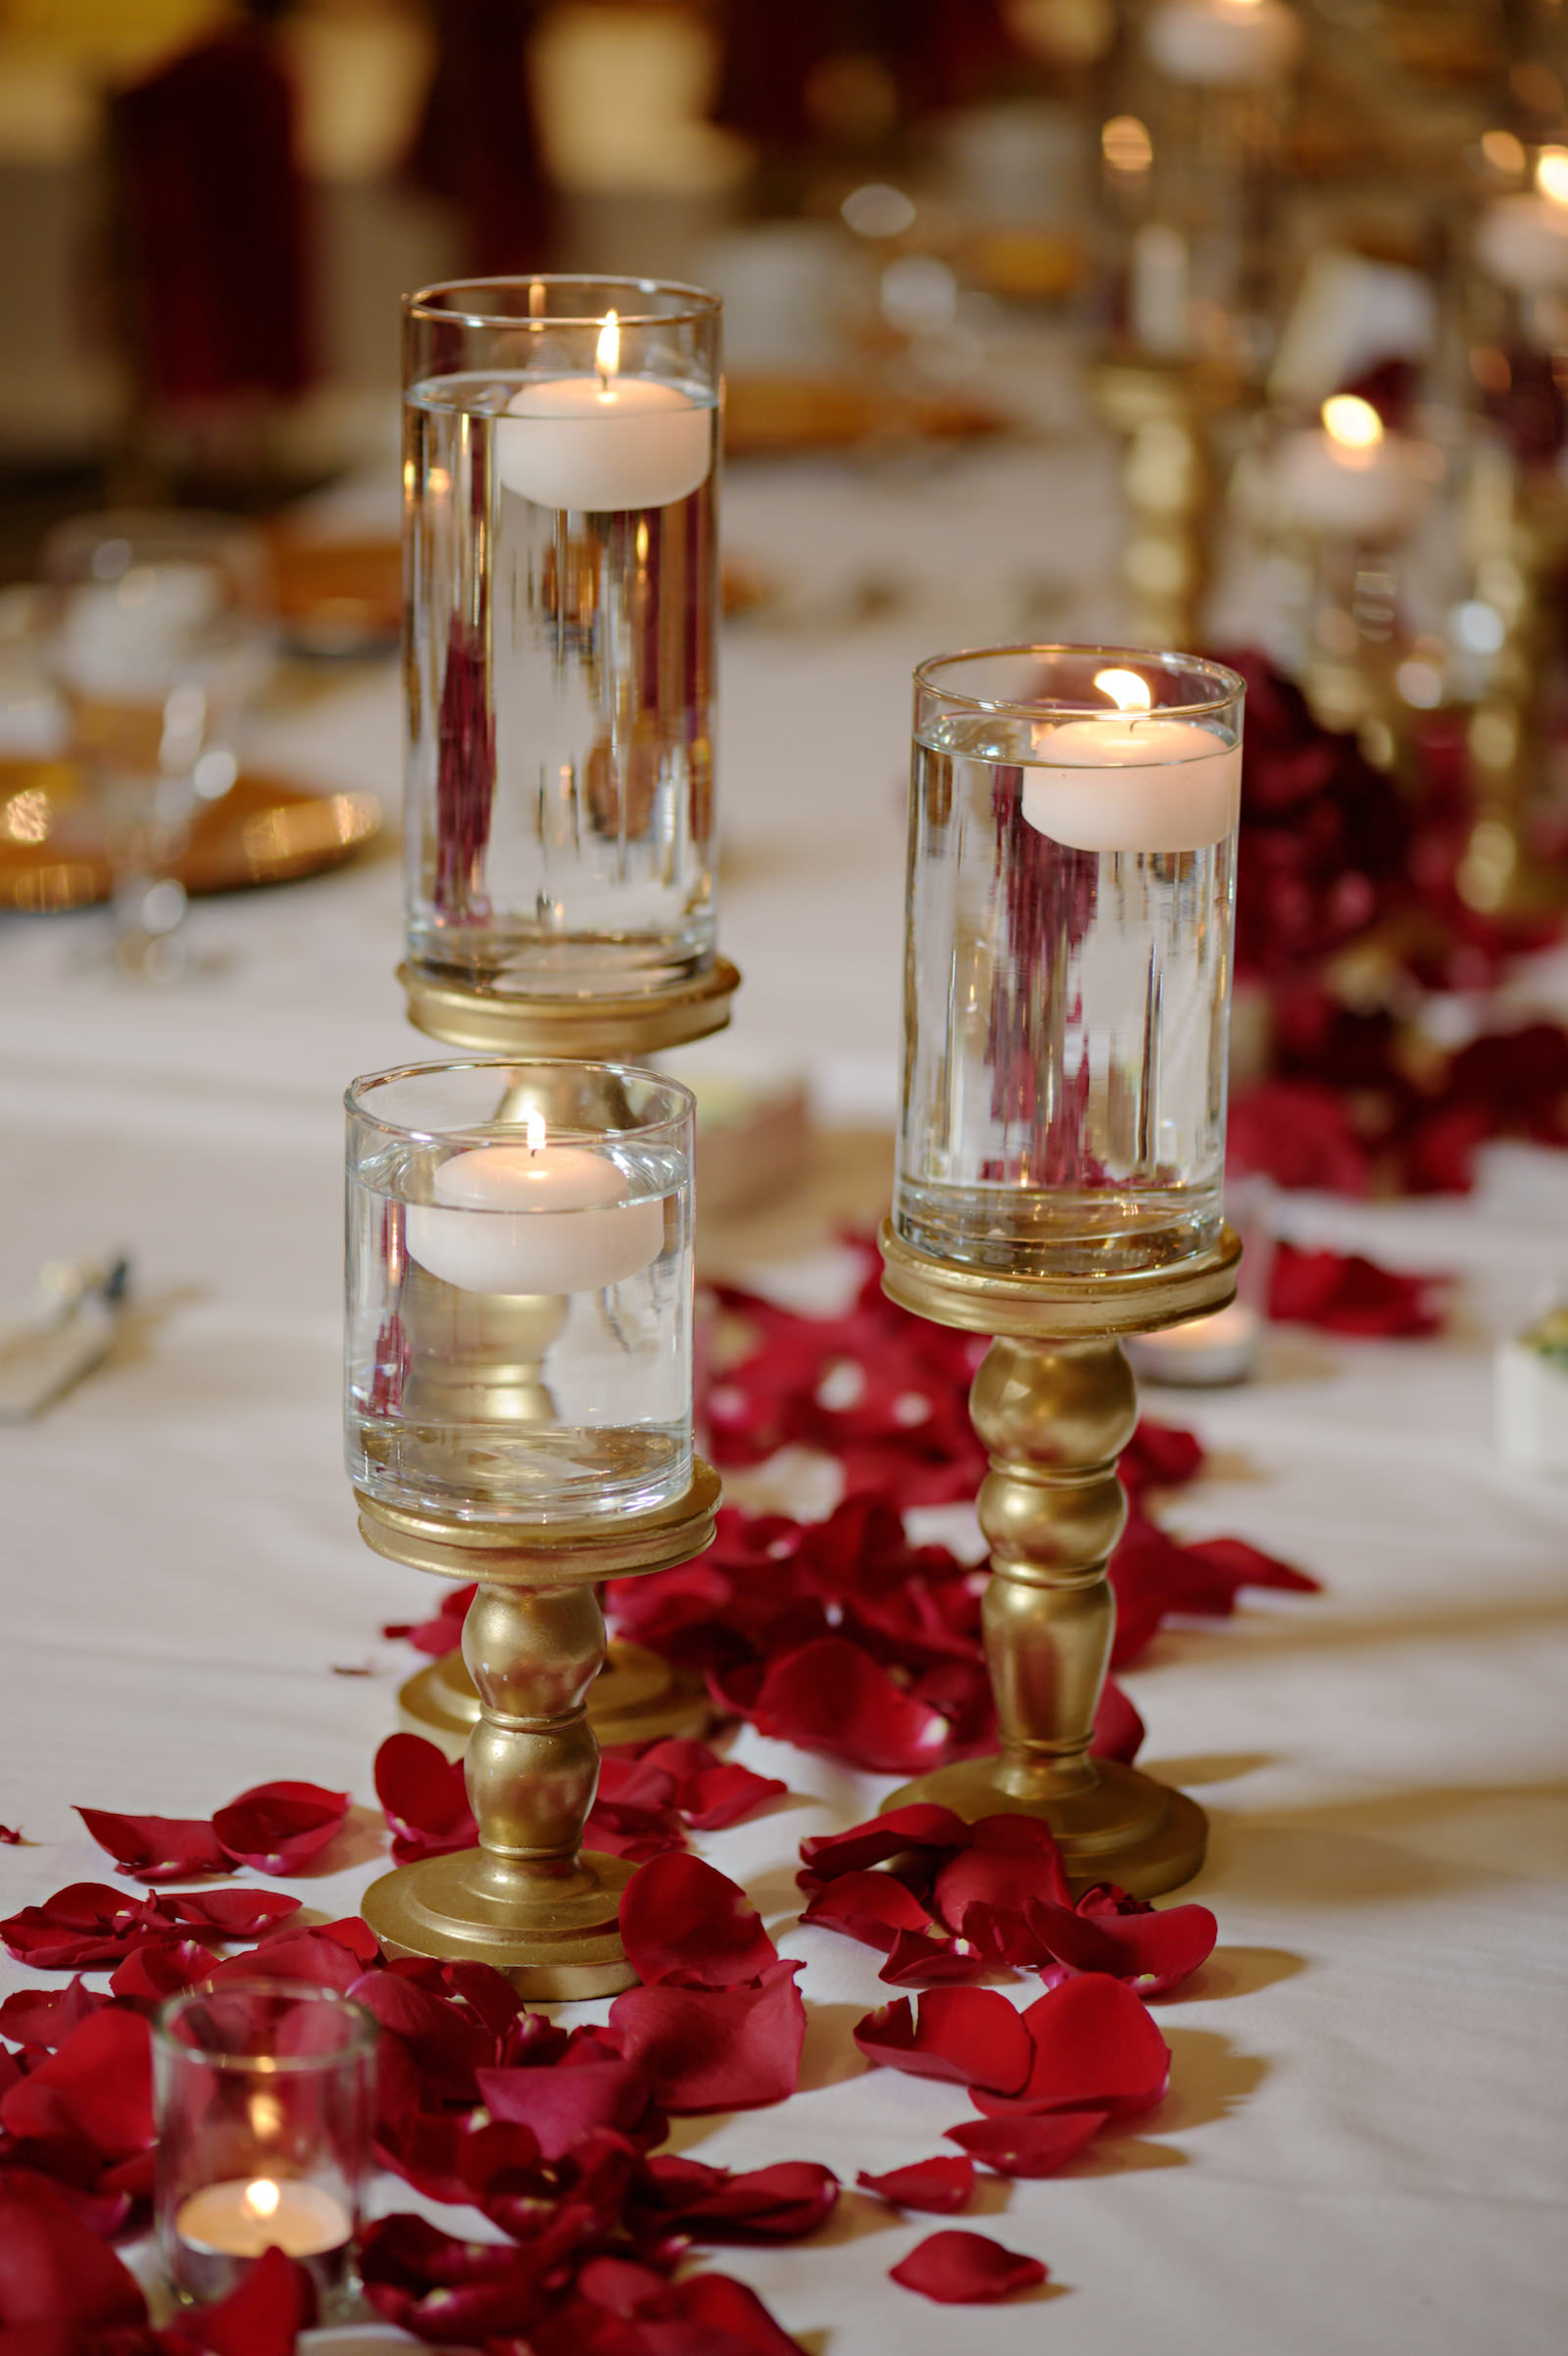 Elegant Indian Wedding Reception Feasting Table Centerpiece Gold Pedestal Floating Candles with Red Rose Petals